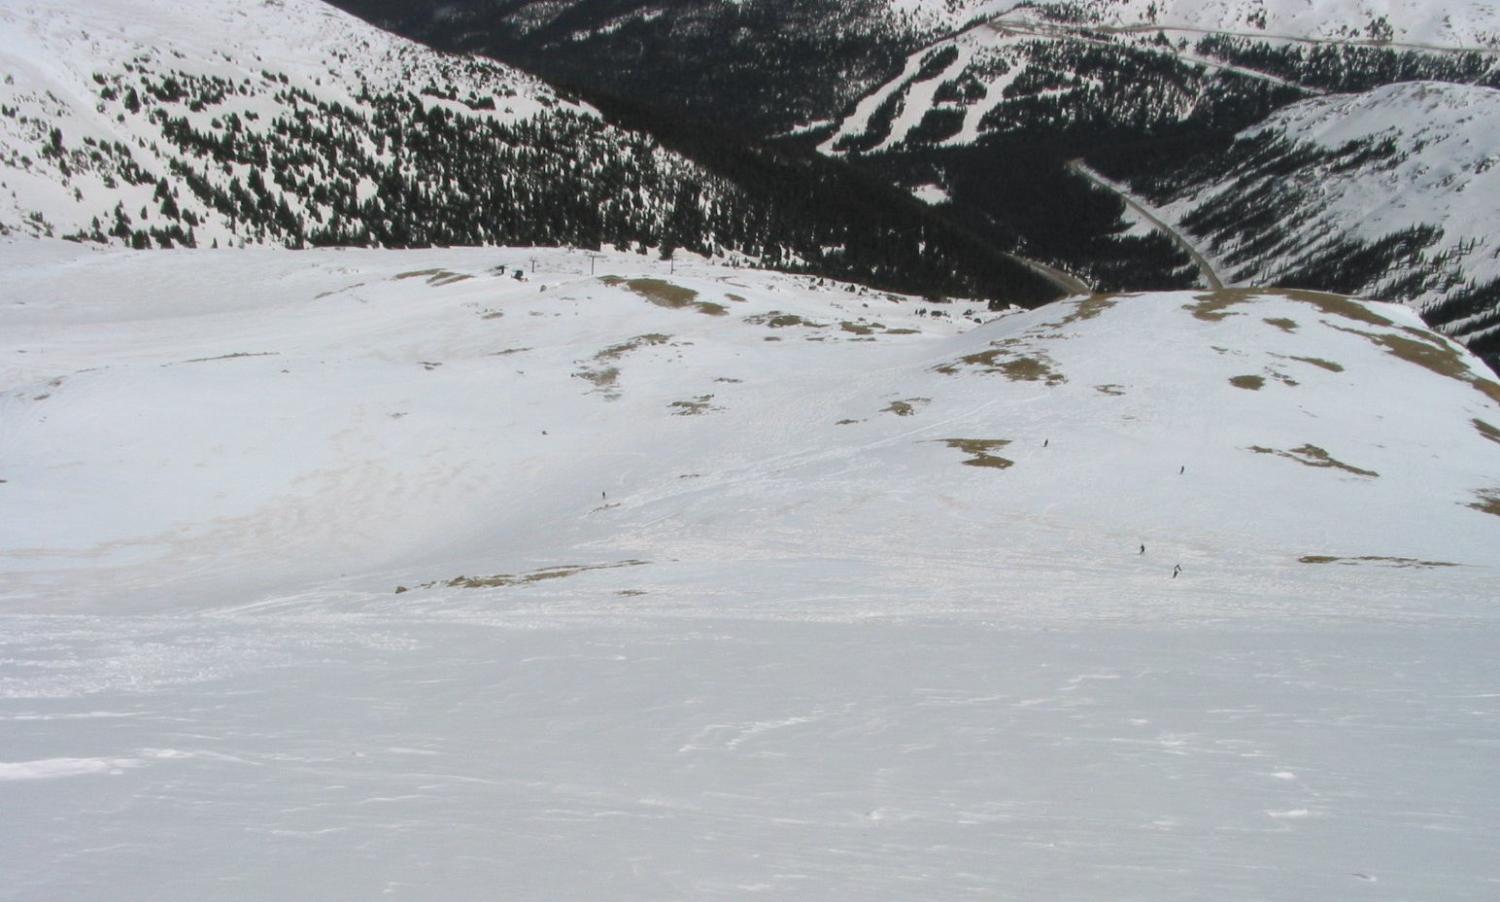 Looking down on the Field of Dreams from the North Ridge off Chair Nine.  The top of Lift Eight can be seen almost one thousand vertical feet below.  Skiers below on the top of Tickler provide some sense of the vast open space in Field of Dreams.